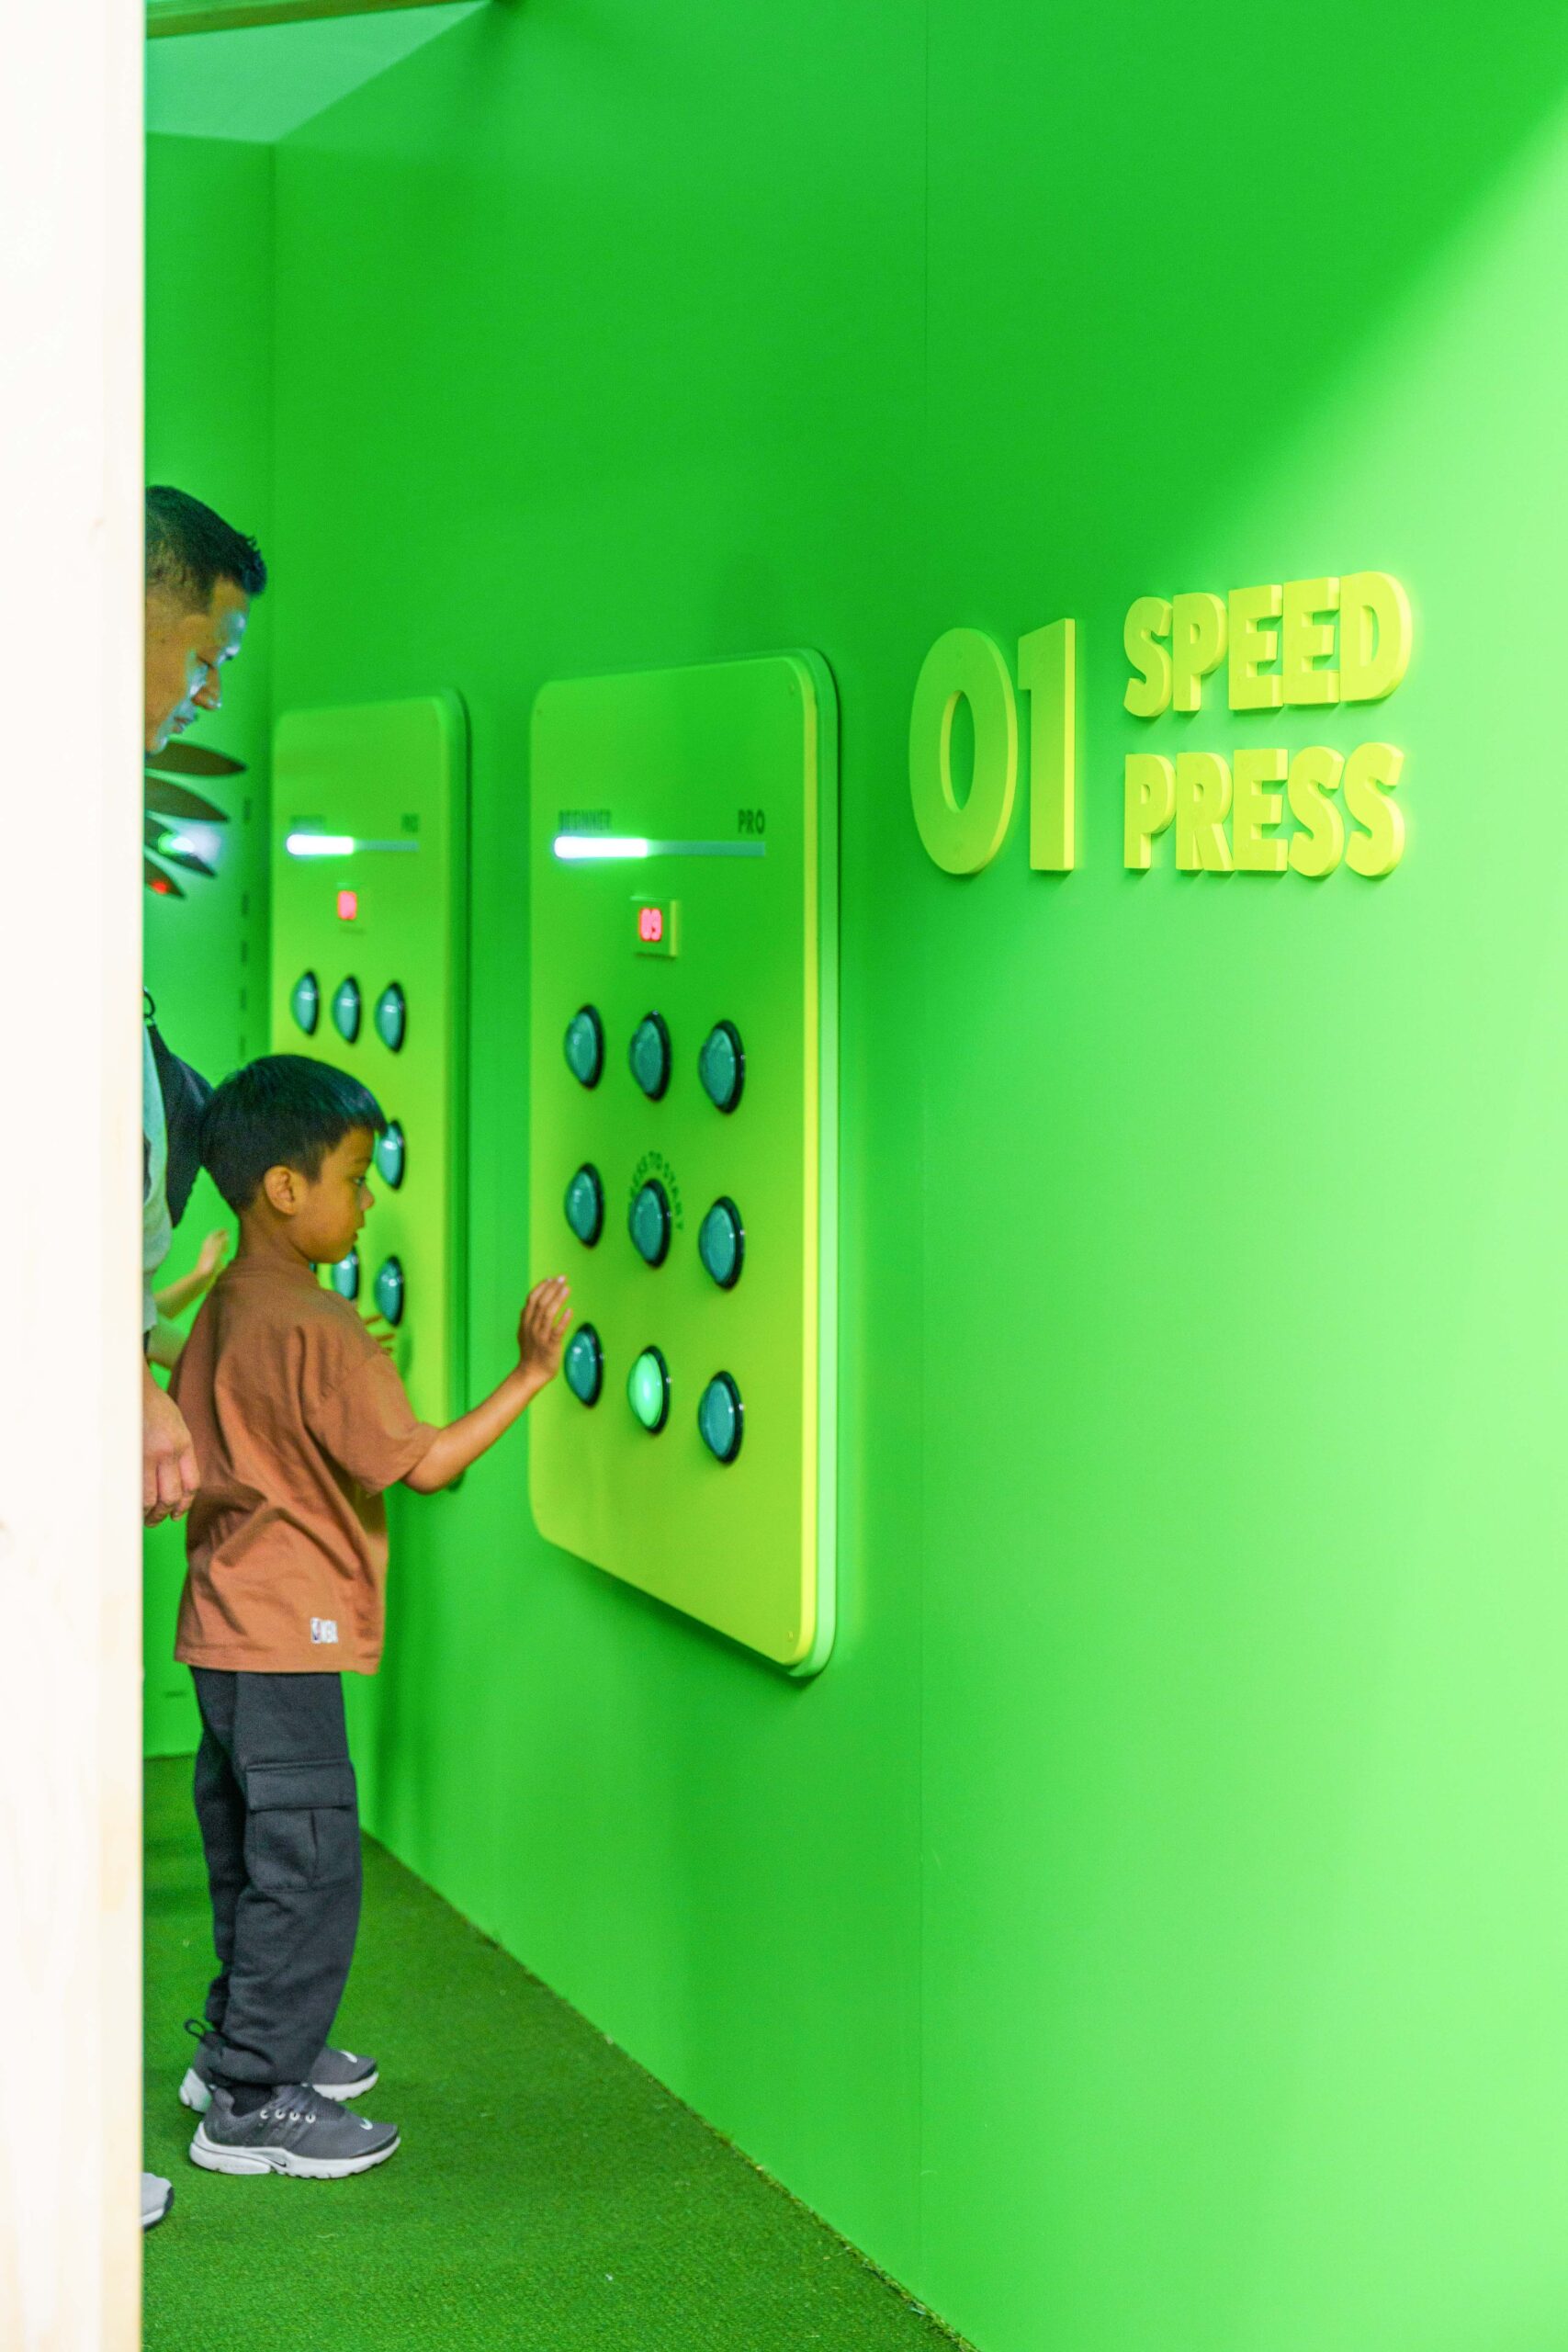 Green Interactive Wall with Button Press Game for Kids.